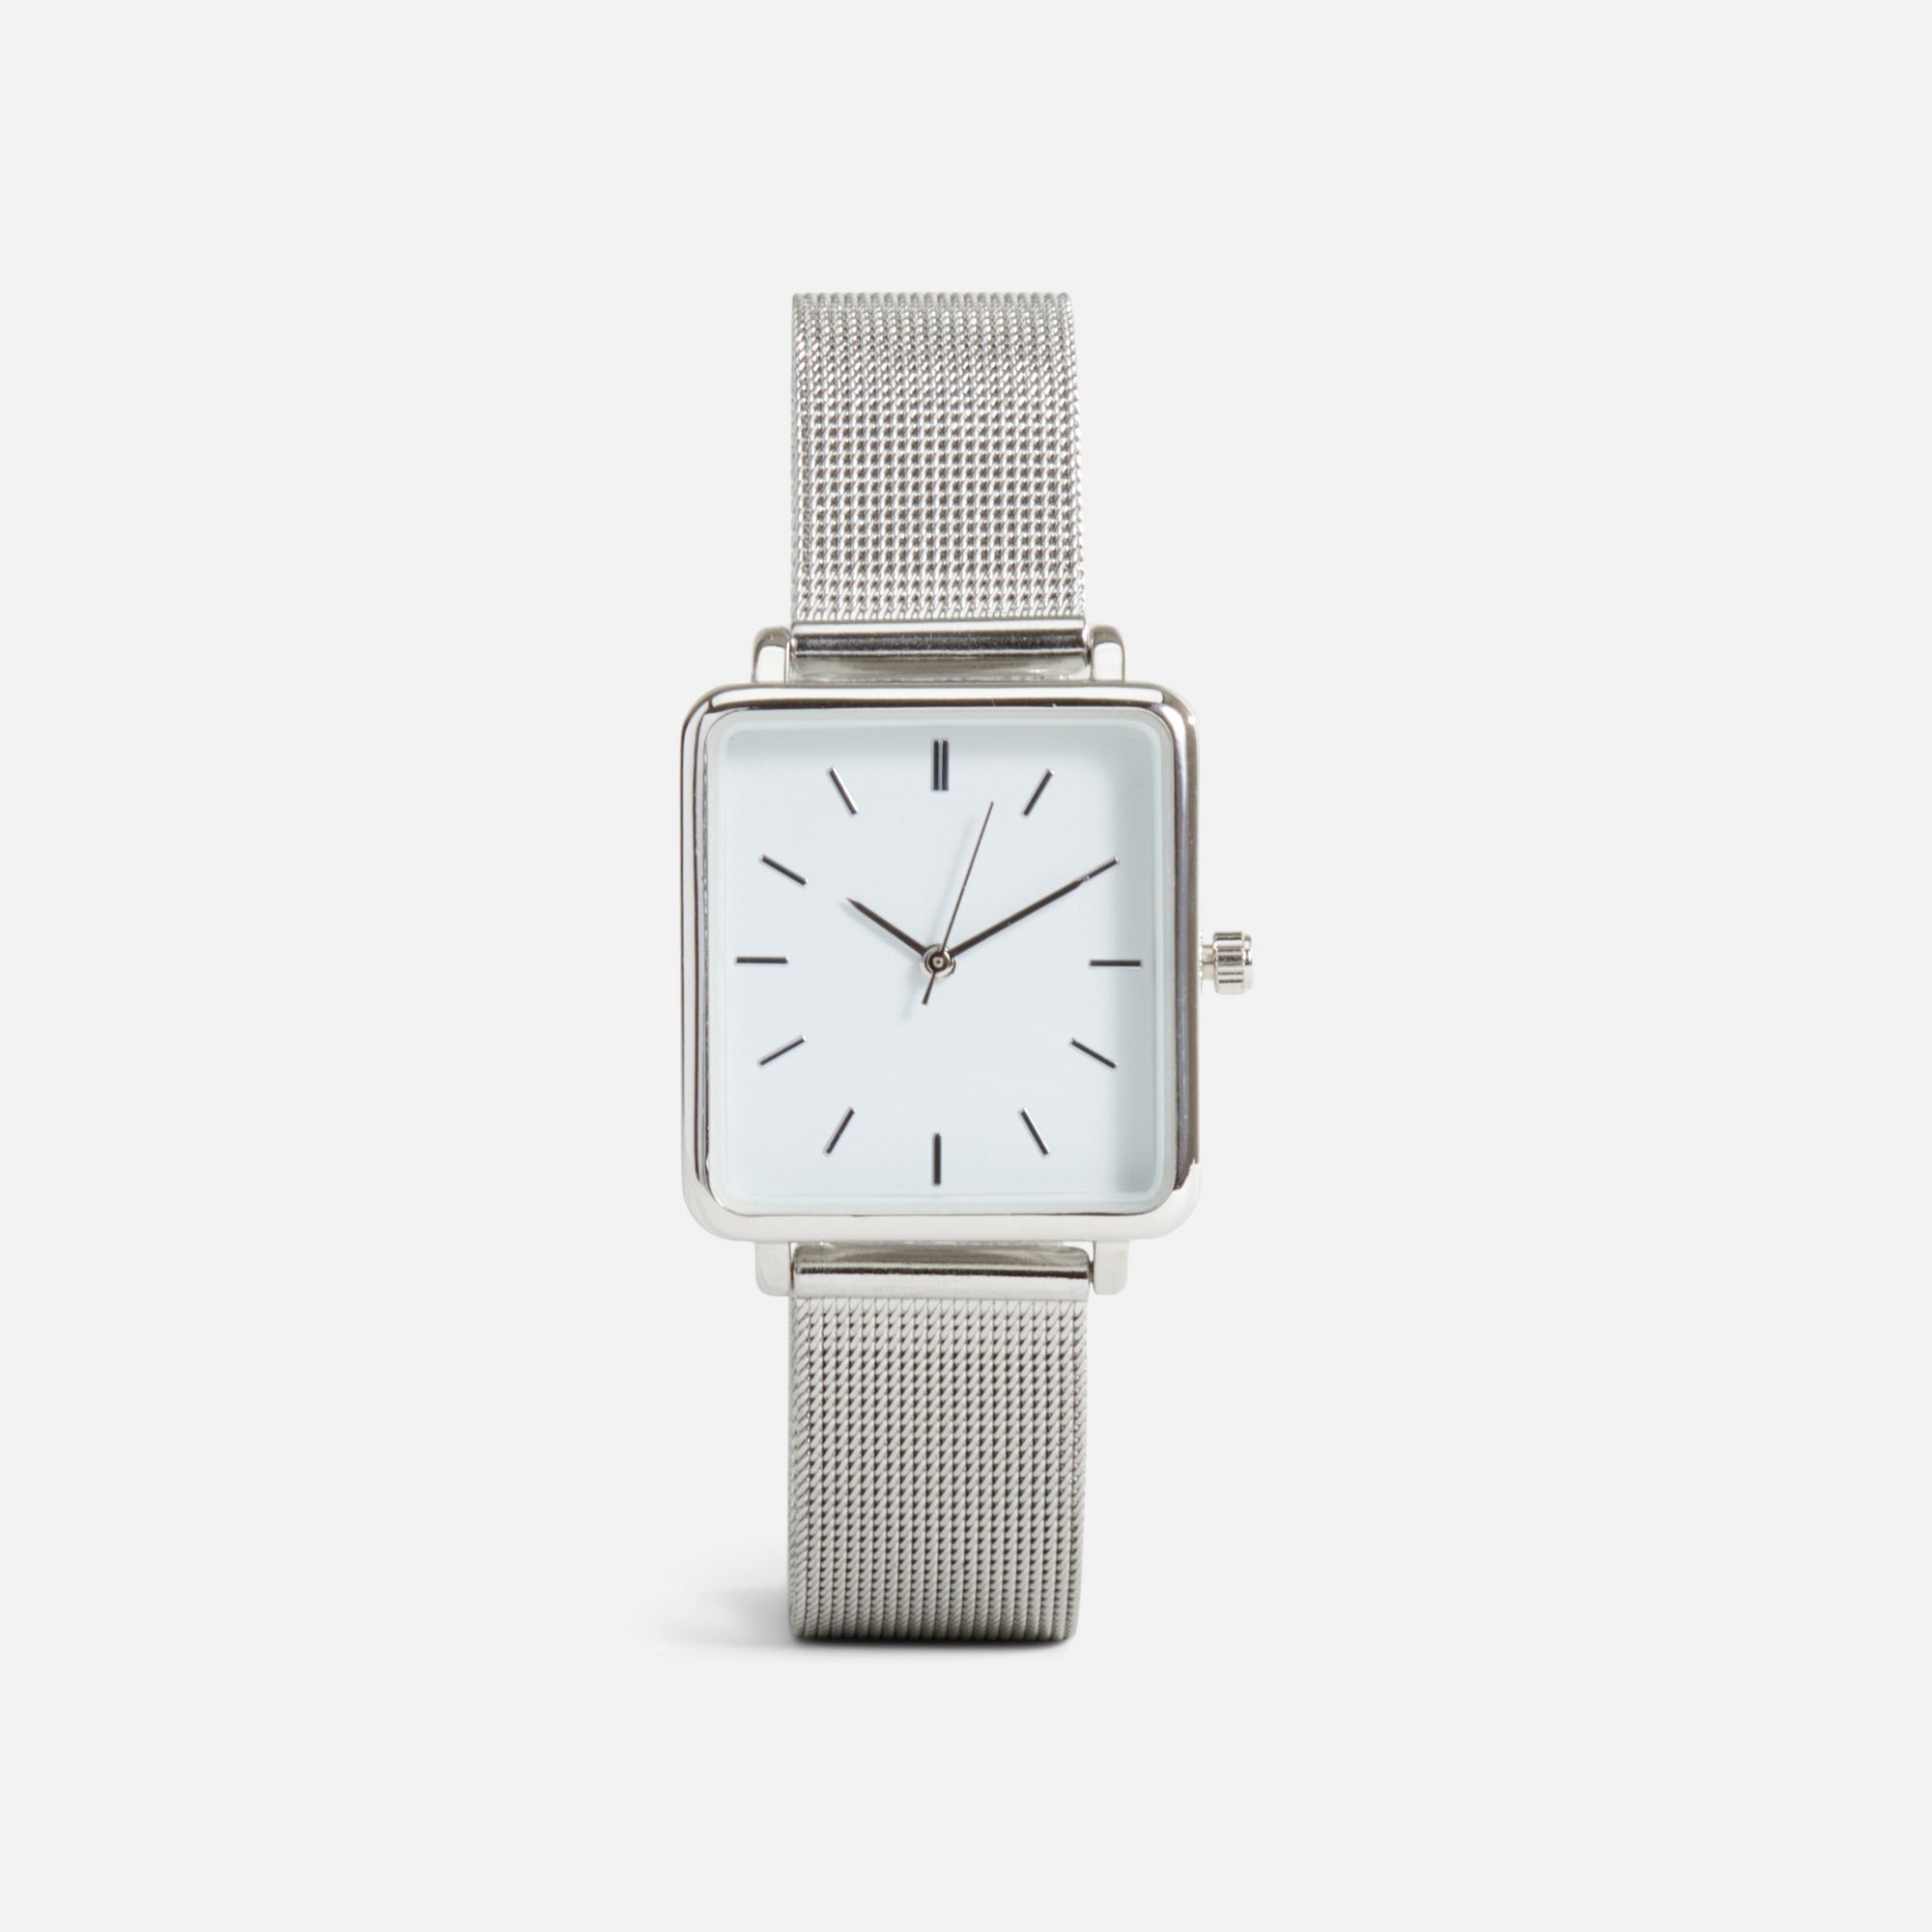 Minima collection - silvered mesh bracelet watch with rectangular white dial